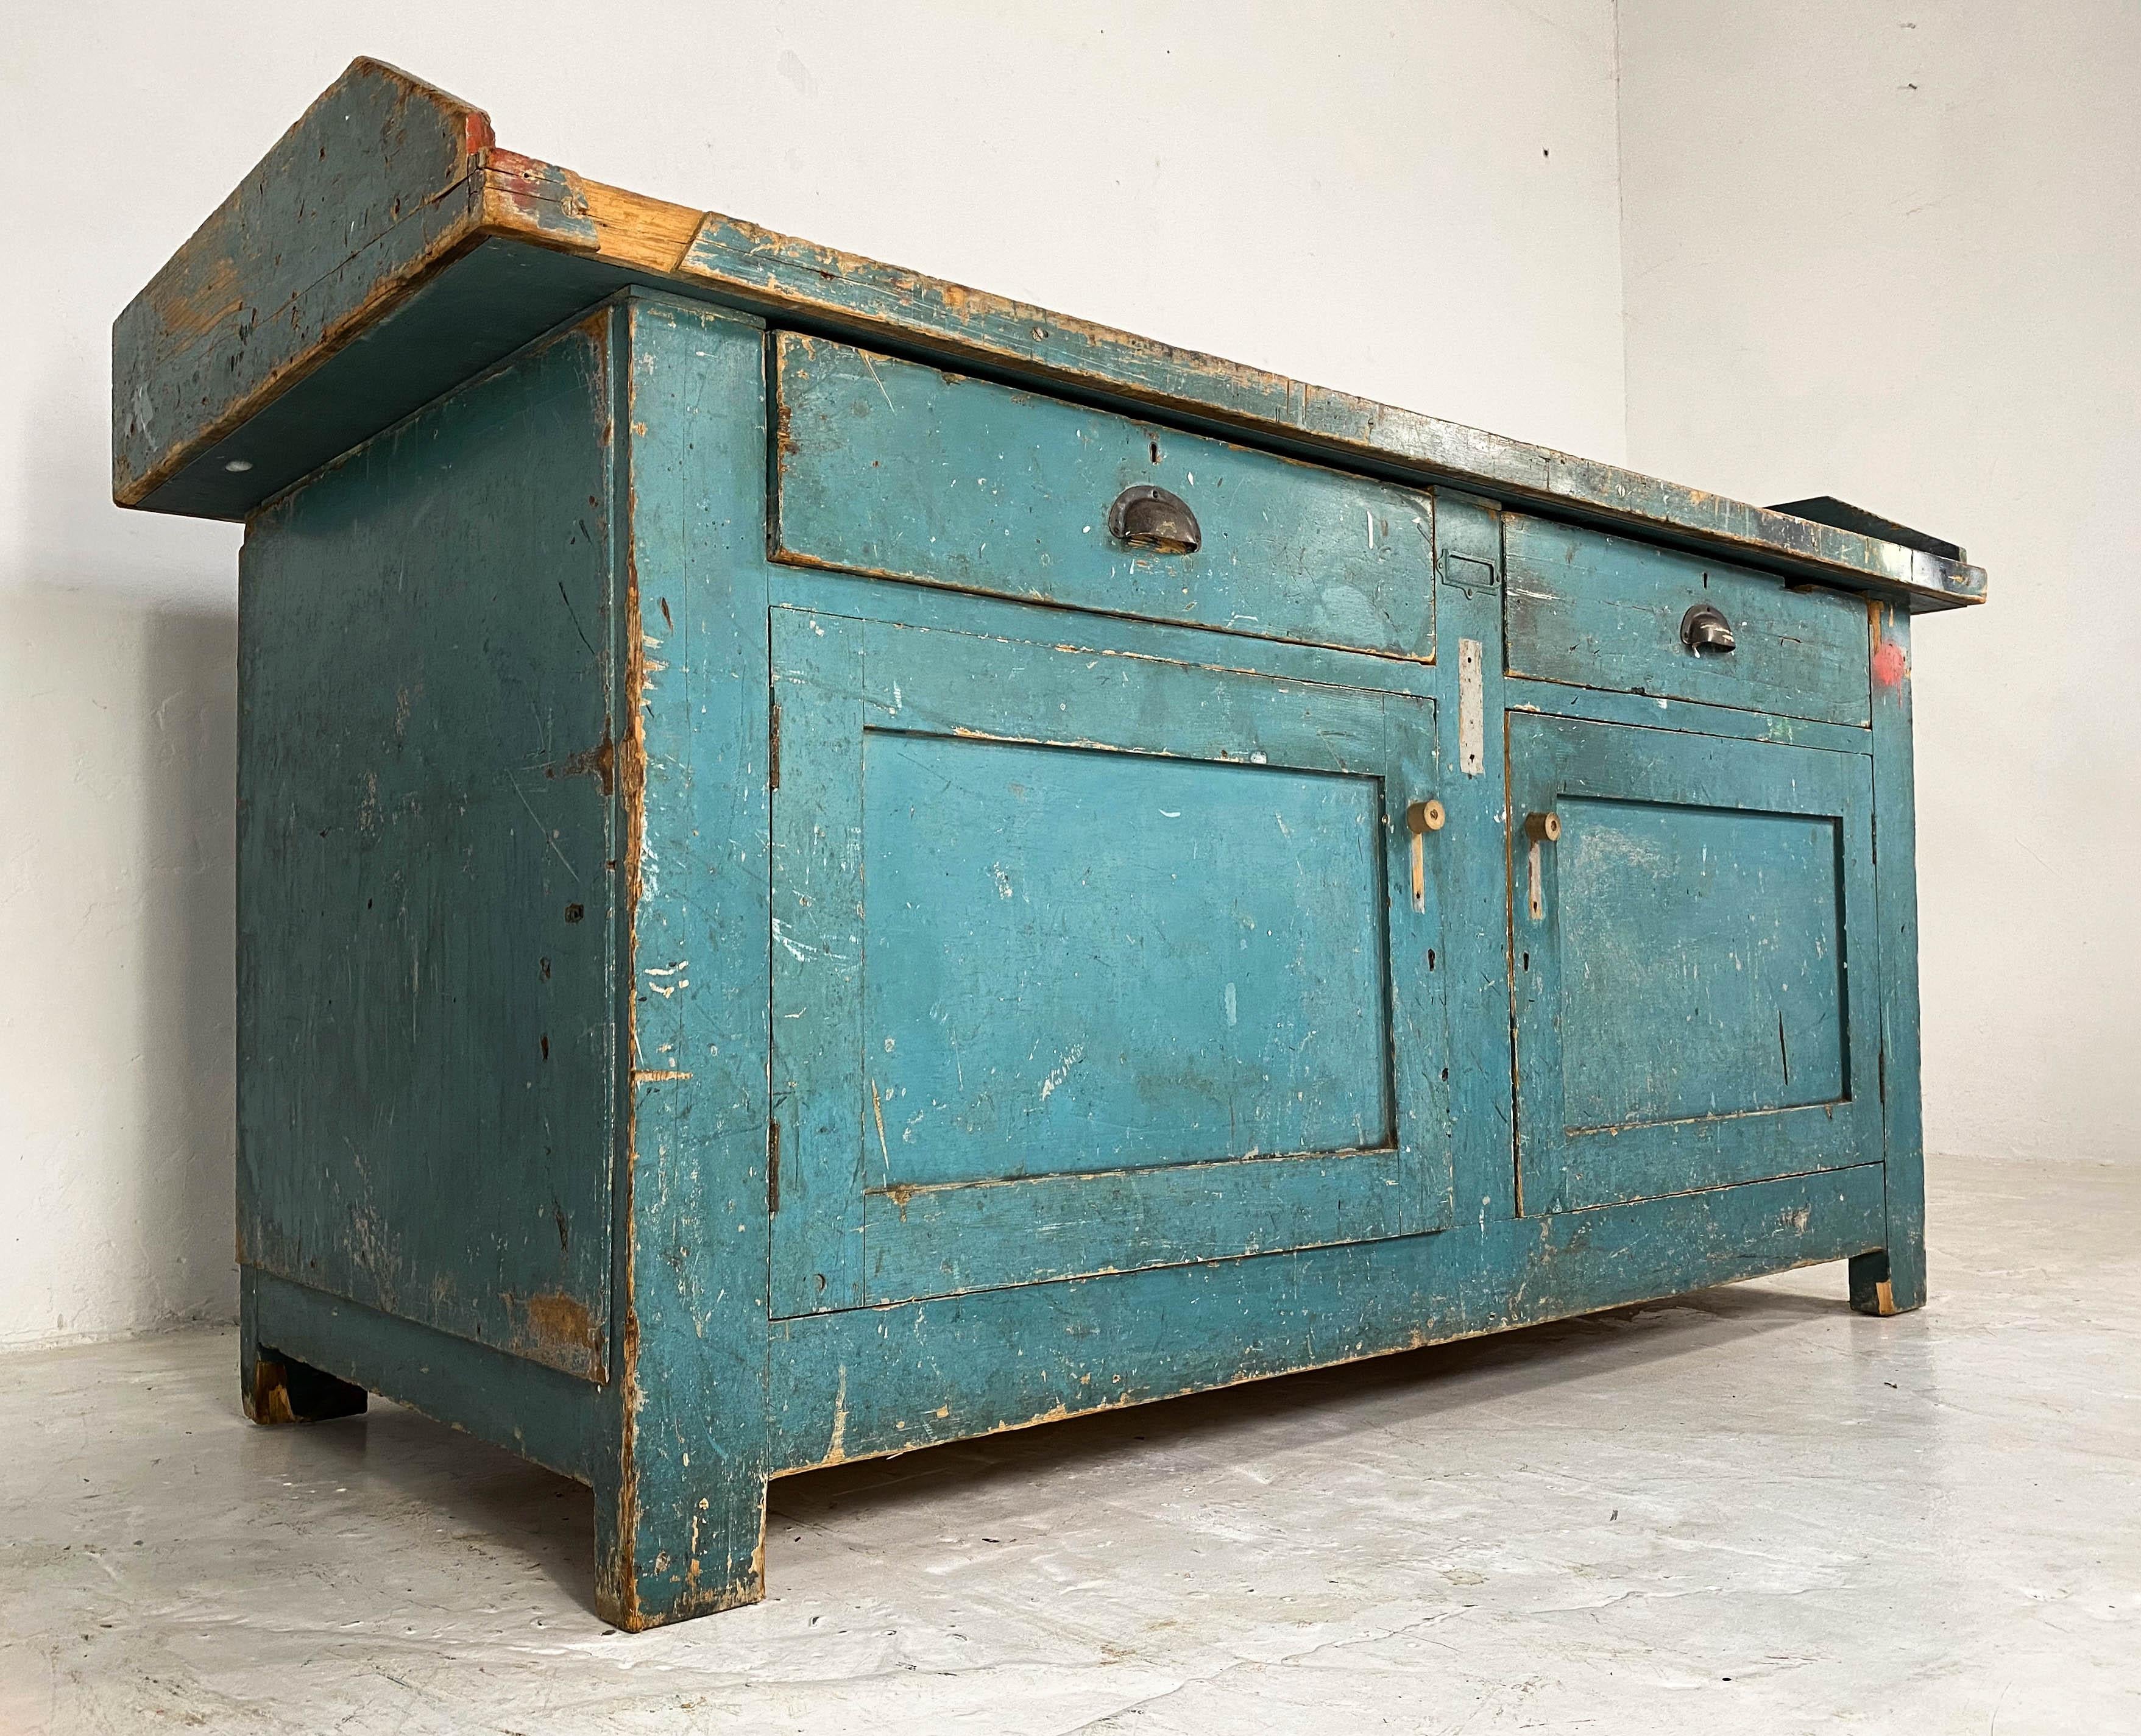 Gorgeous turquoise blue workbench which originated from a bicycle repair shop in Nottingham, England; a city famous for manufacturing Raleigh bicycles.
It has all original plywood panels, two drawers with brass cup handles and plenty of storage in